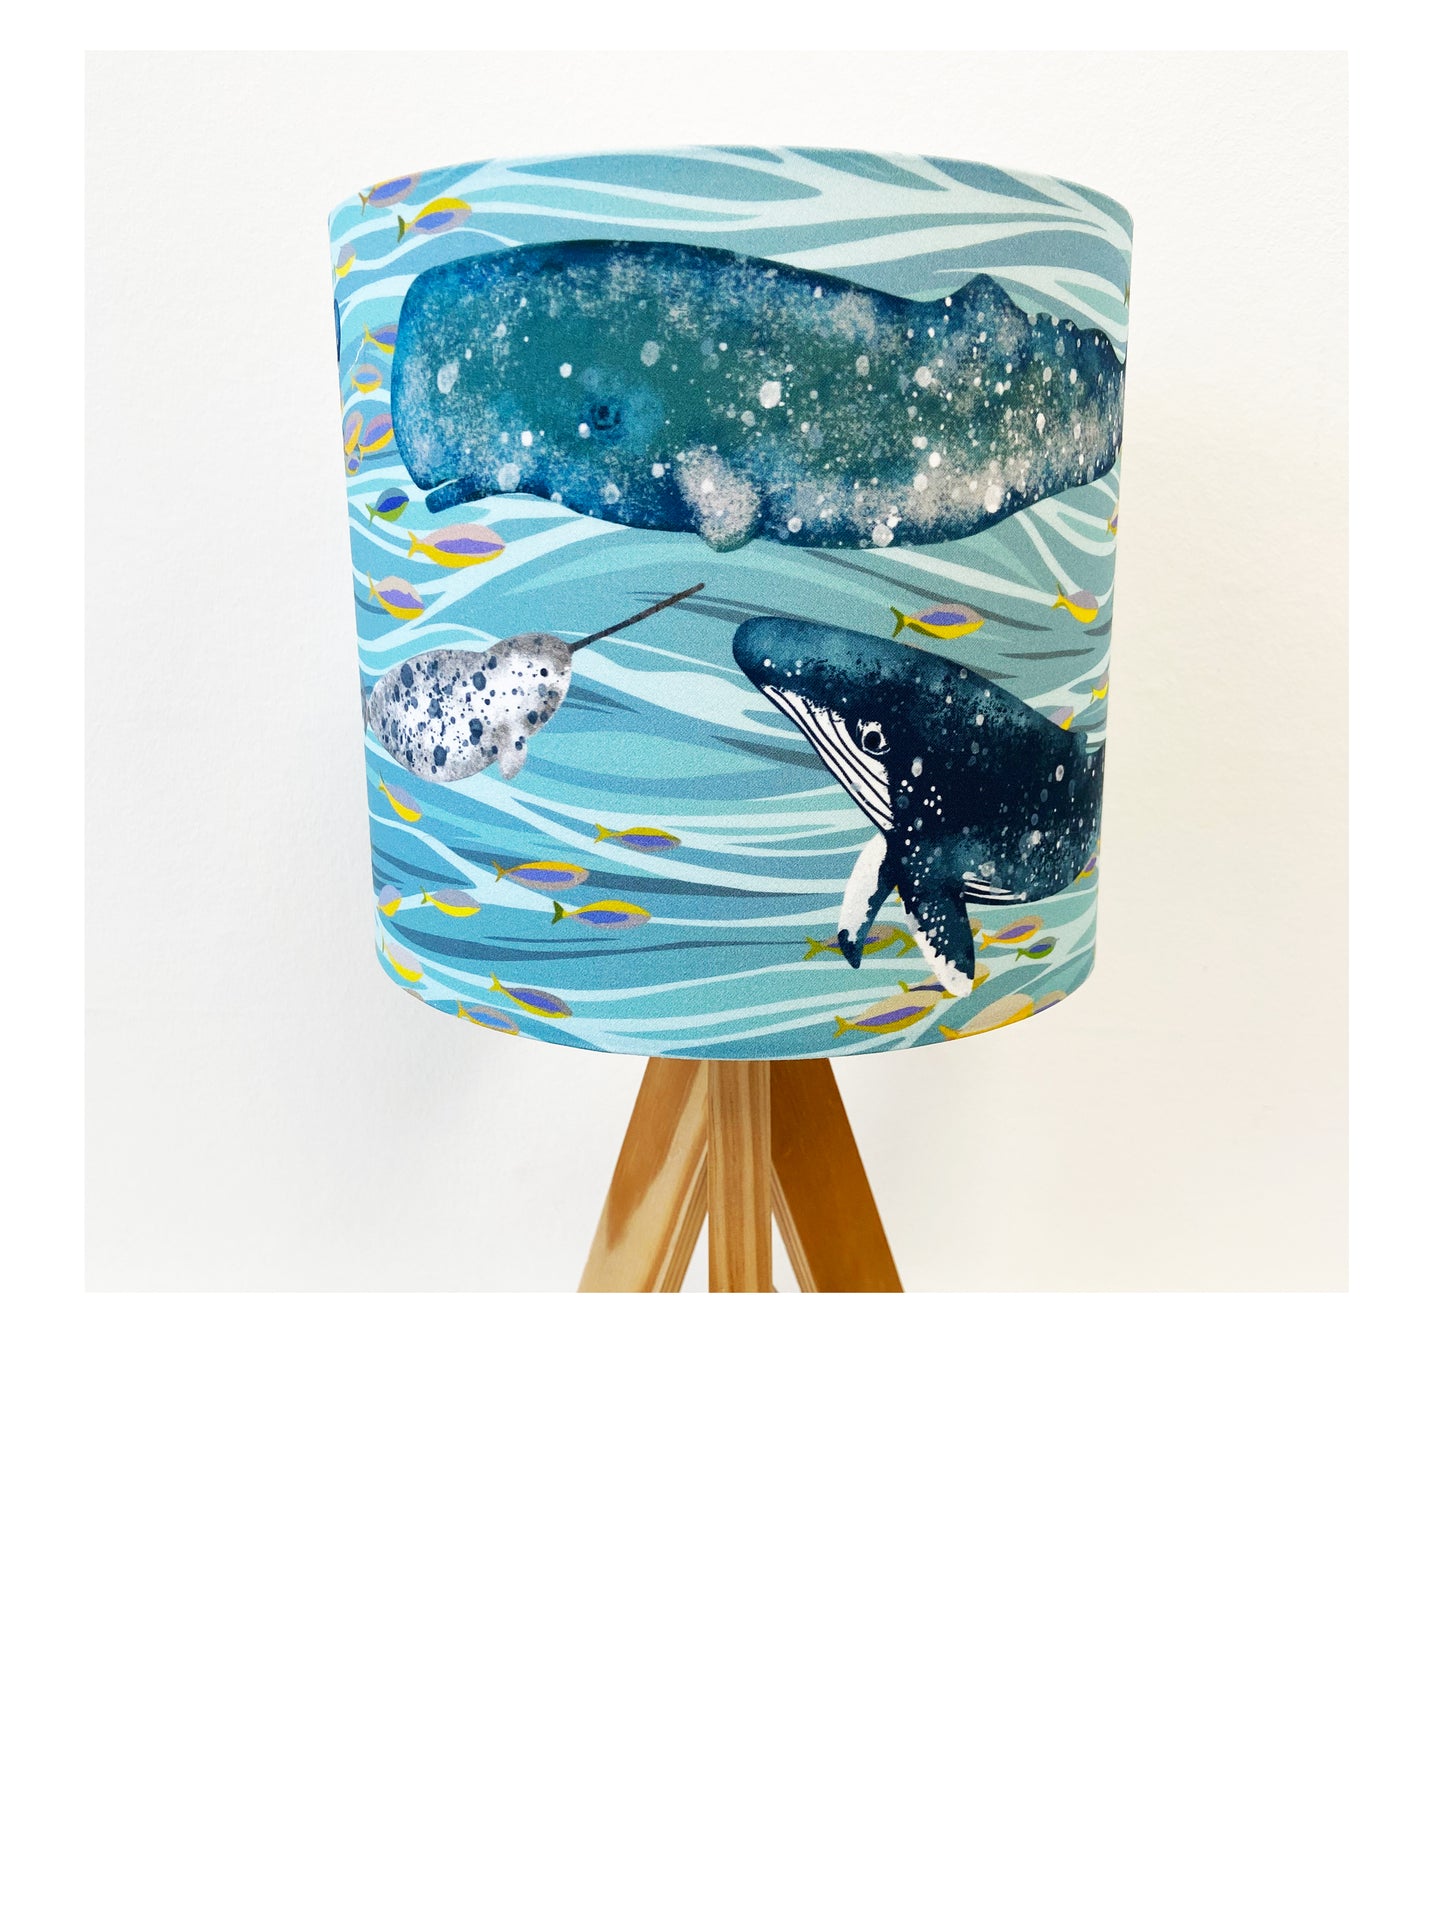 HUMPHREY the WHALE & FRIENDS Lampshade